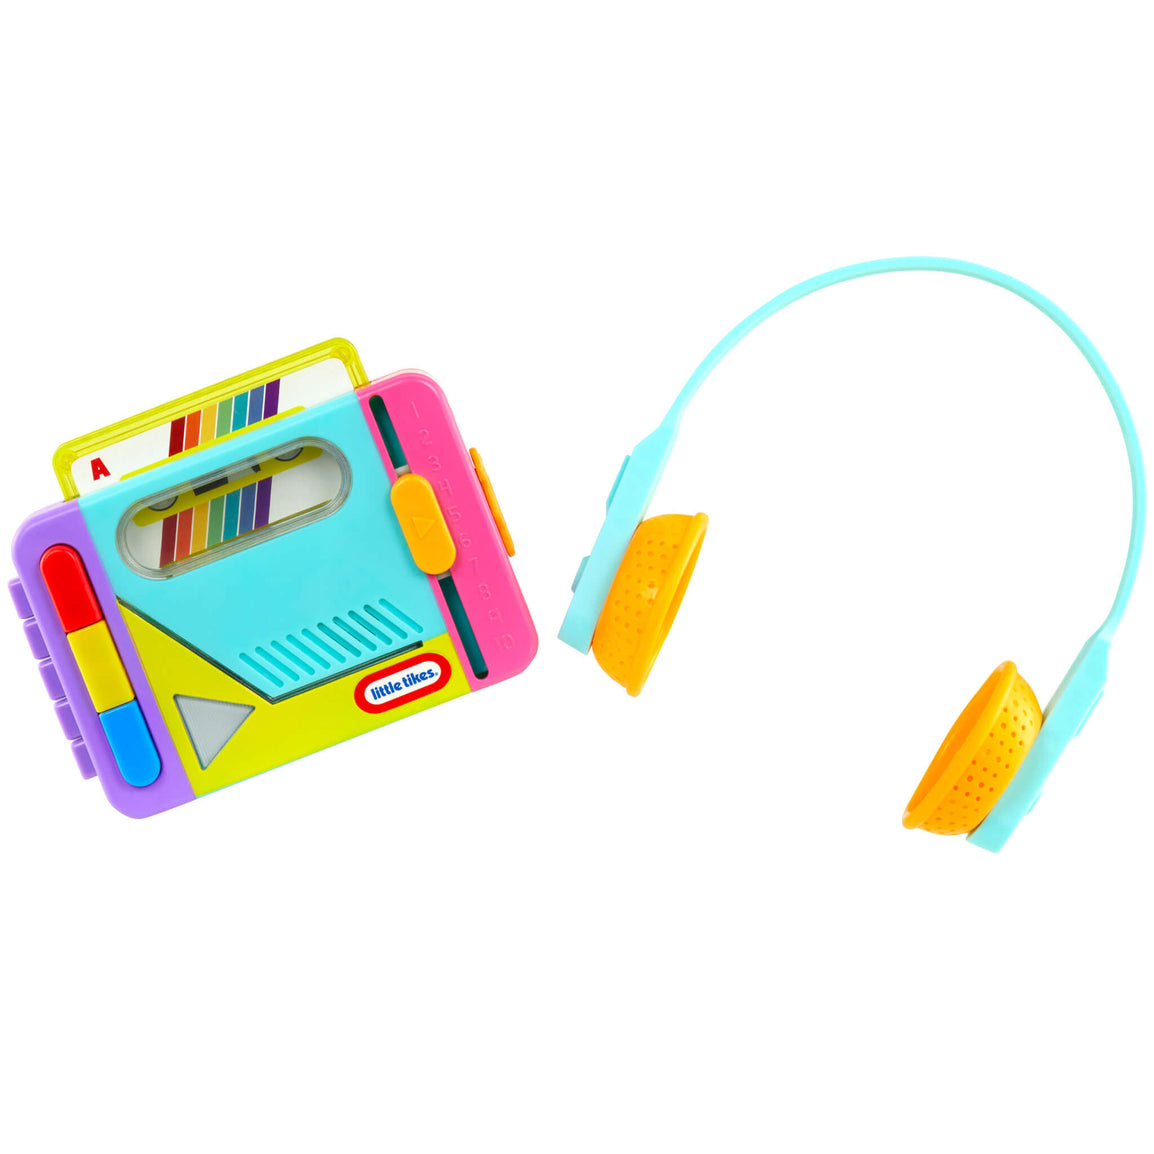 Old School™ Rainbow Remix Music Player - Official Little Tikes Website